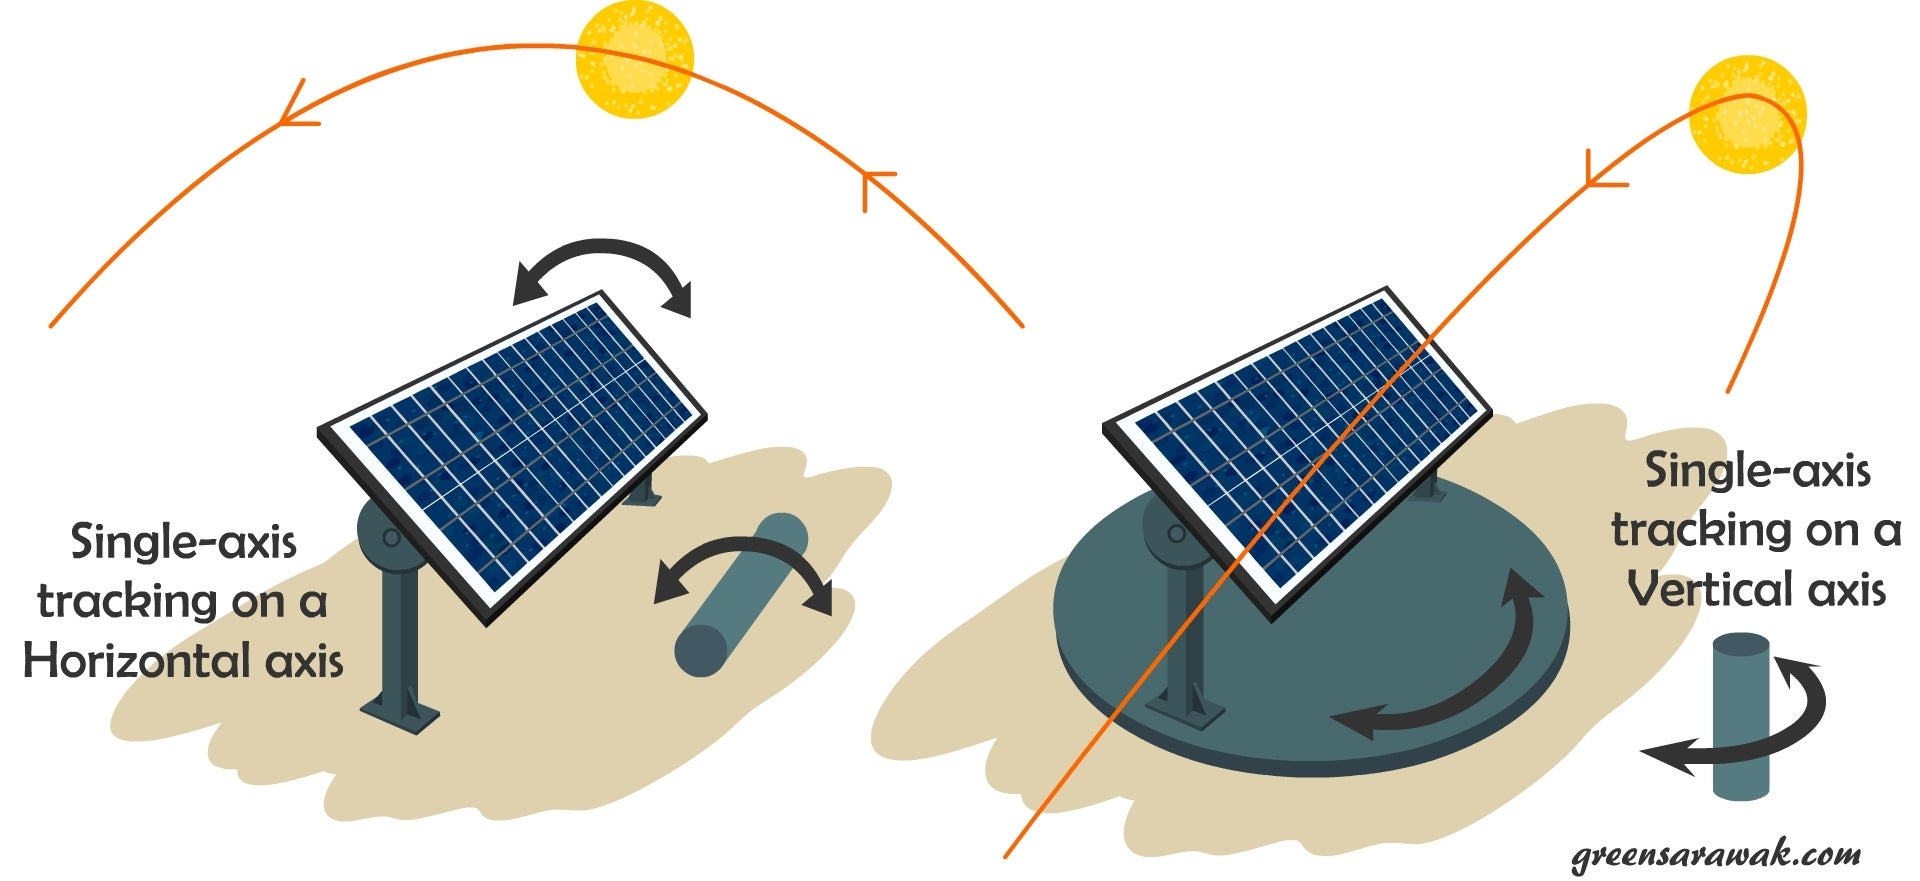 Solar tracker, Definition & Facts